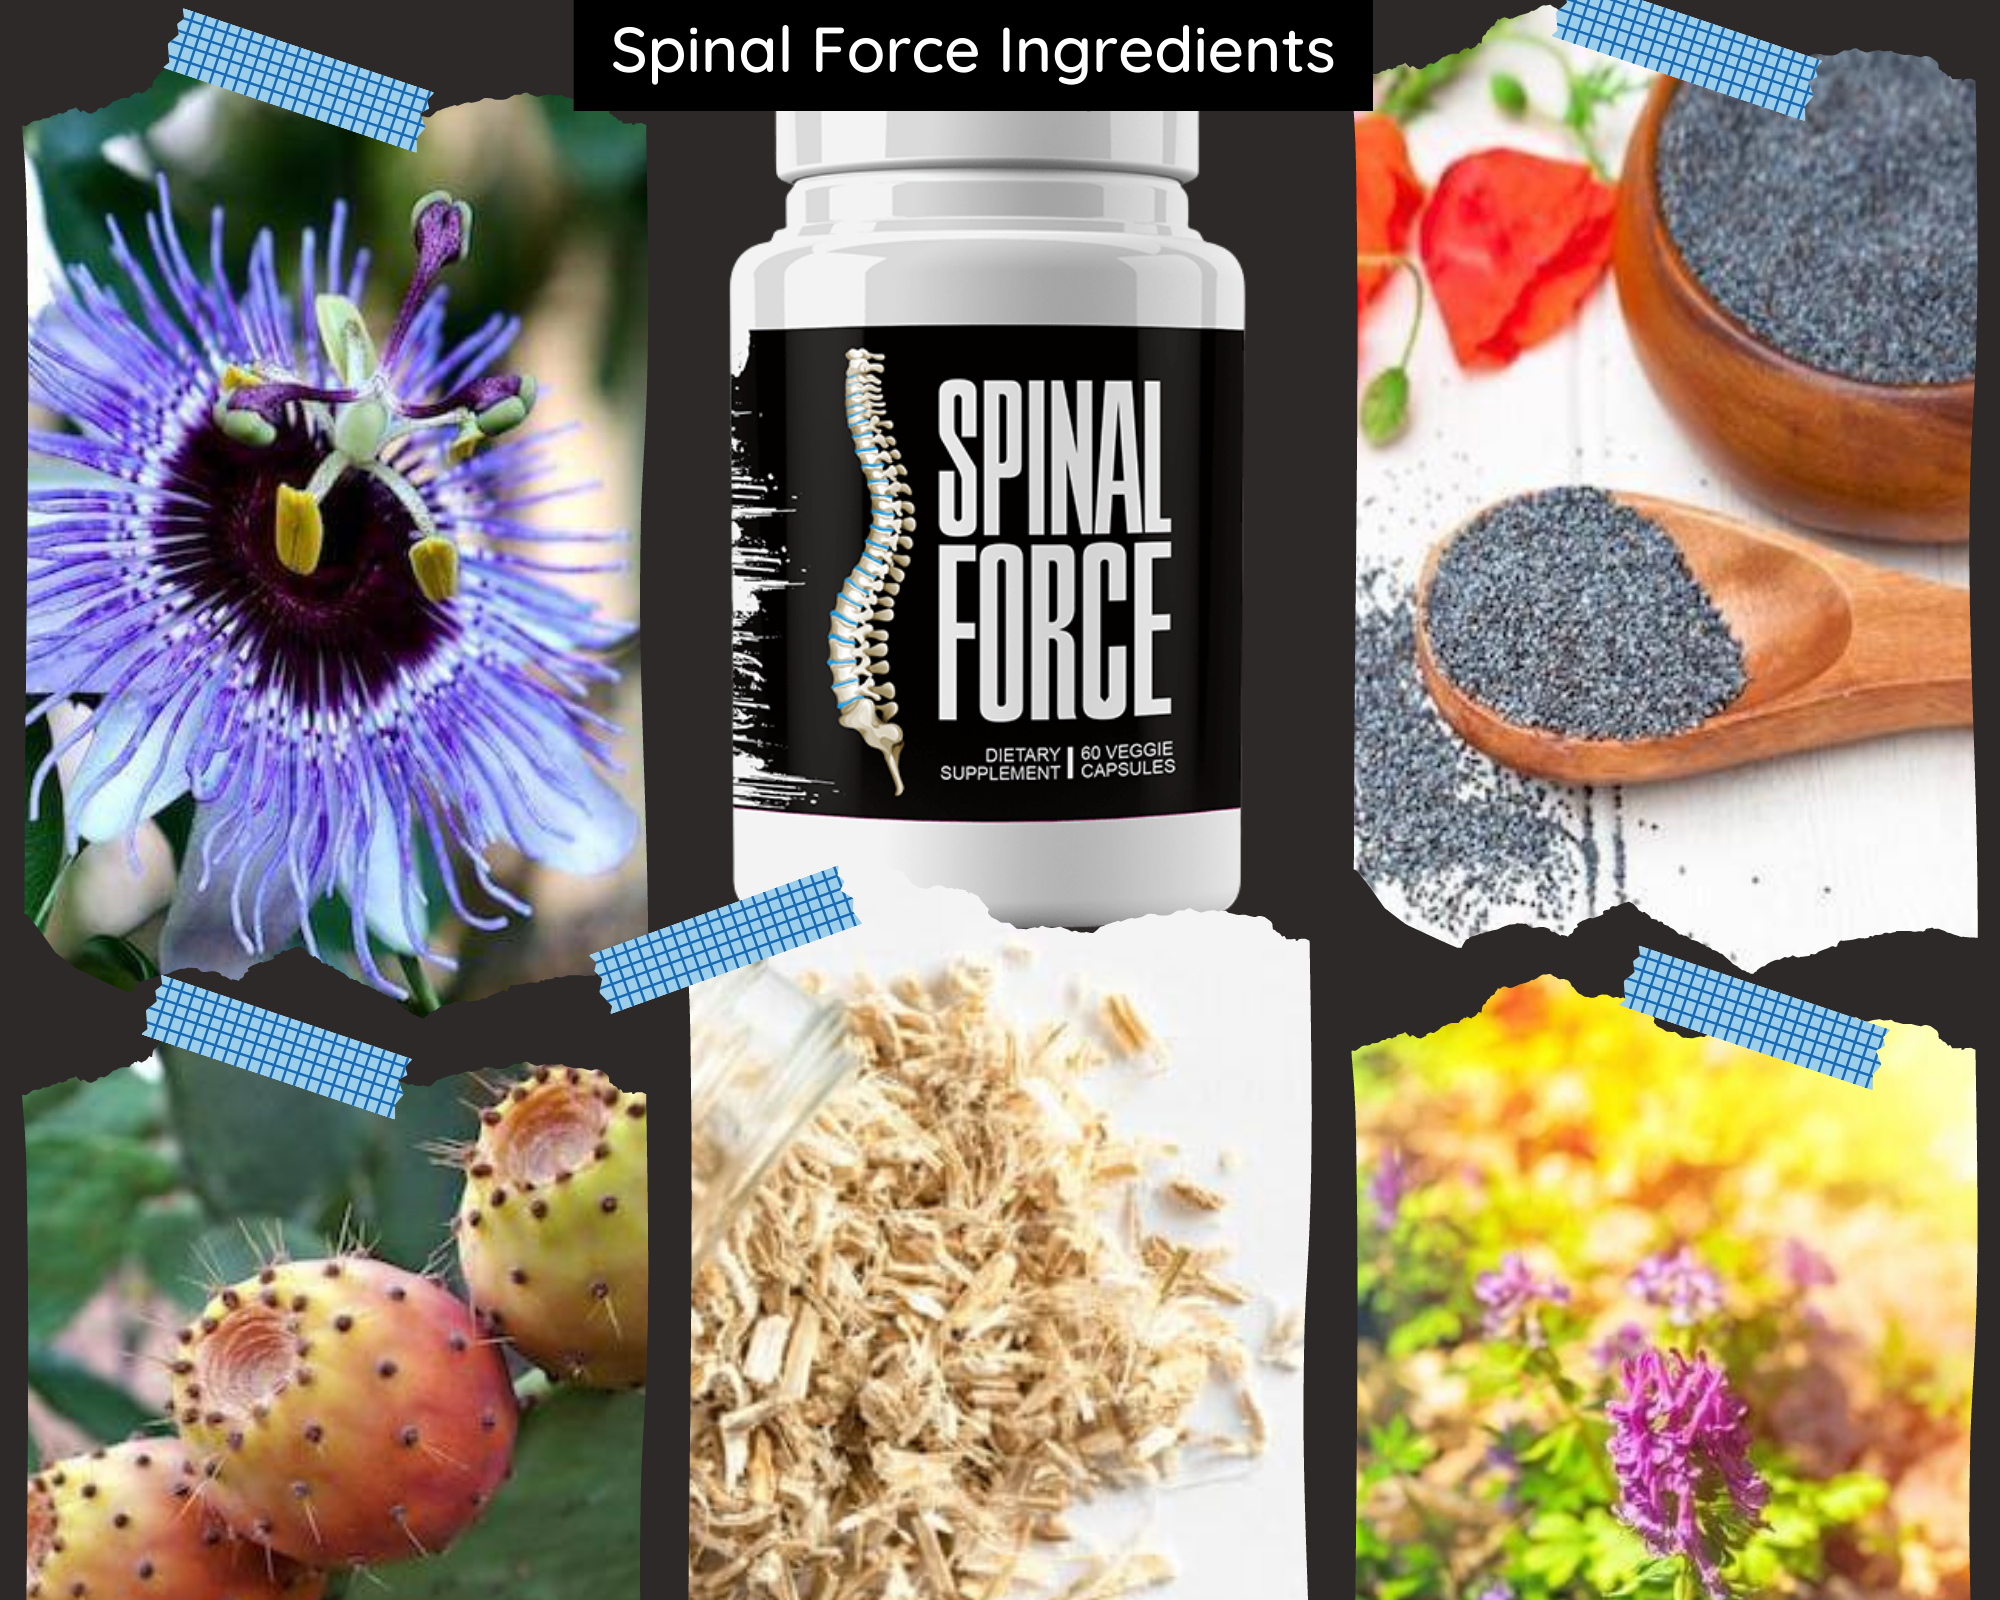 Spinal Force ingredients